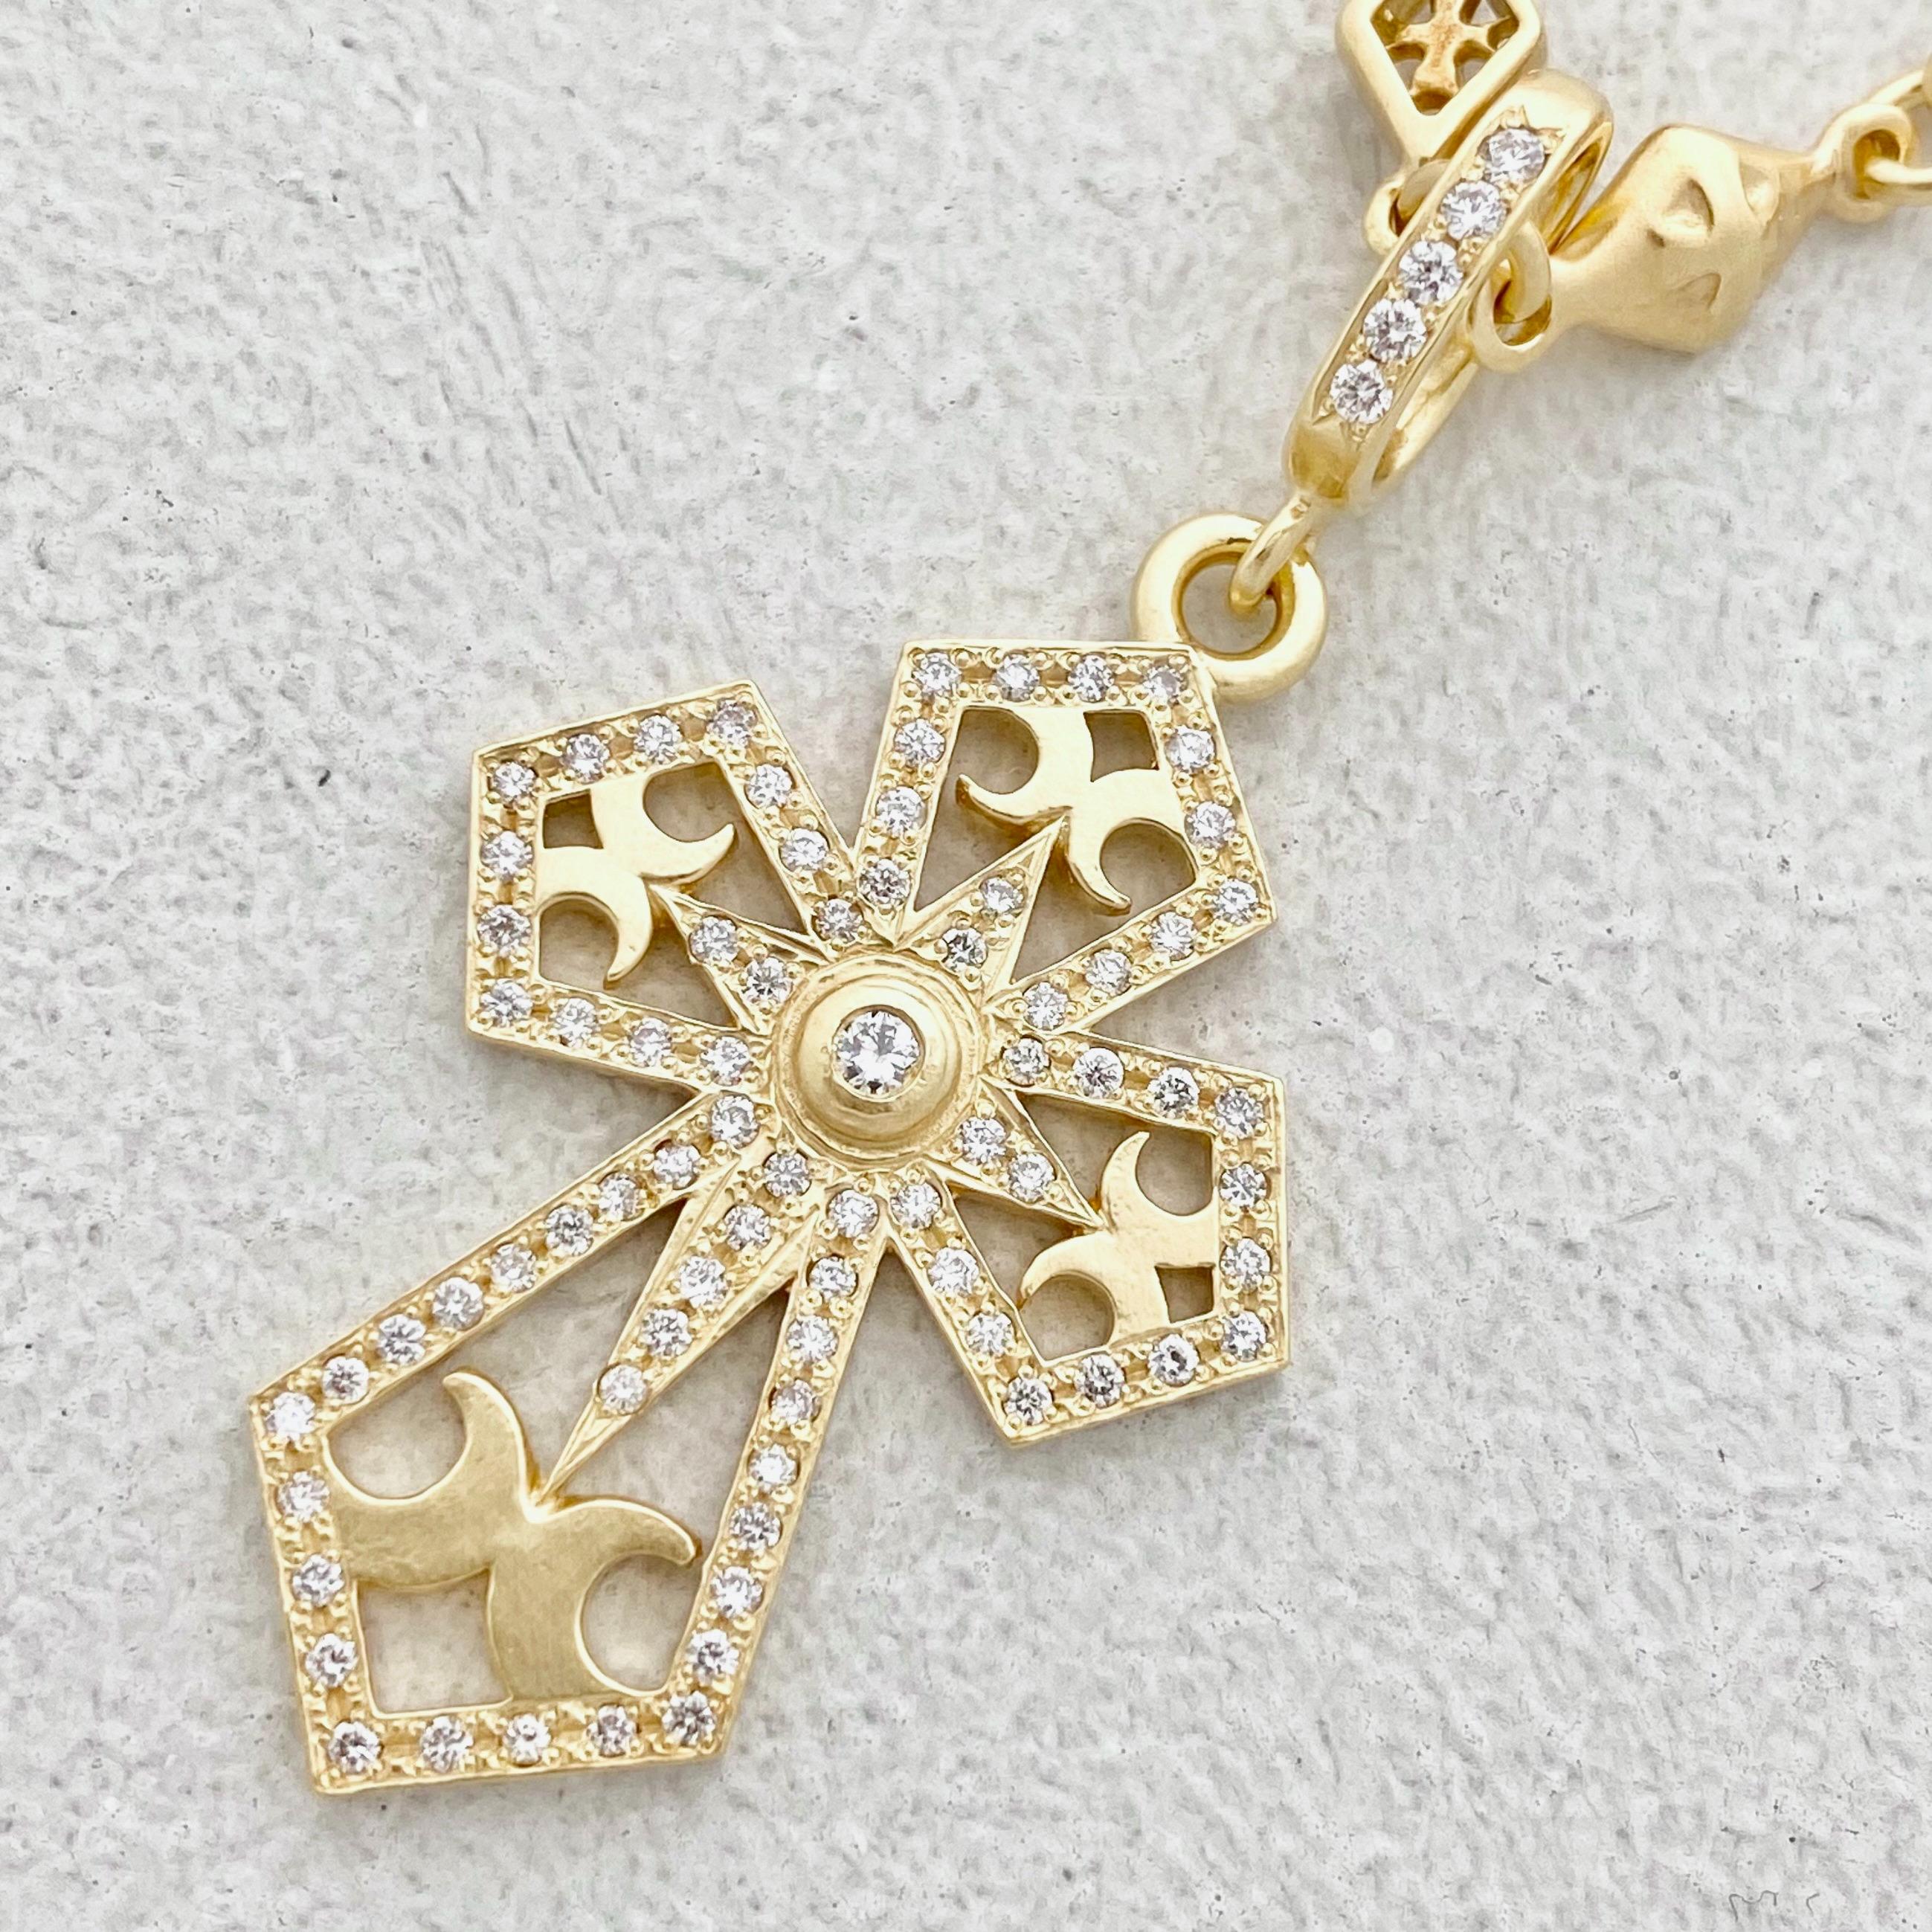 SMALL CATHEDRAL CROSS YELLOW GOLD PENDANT/DIAMONDS